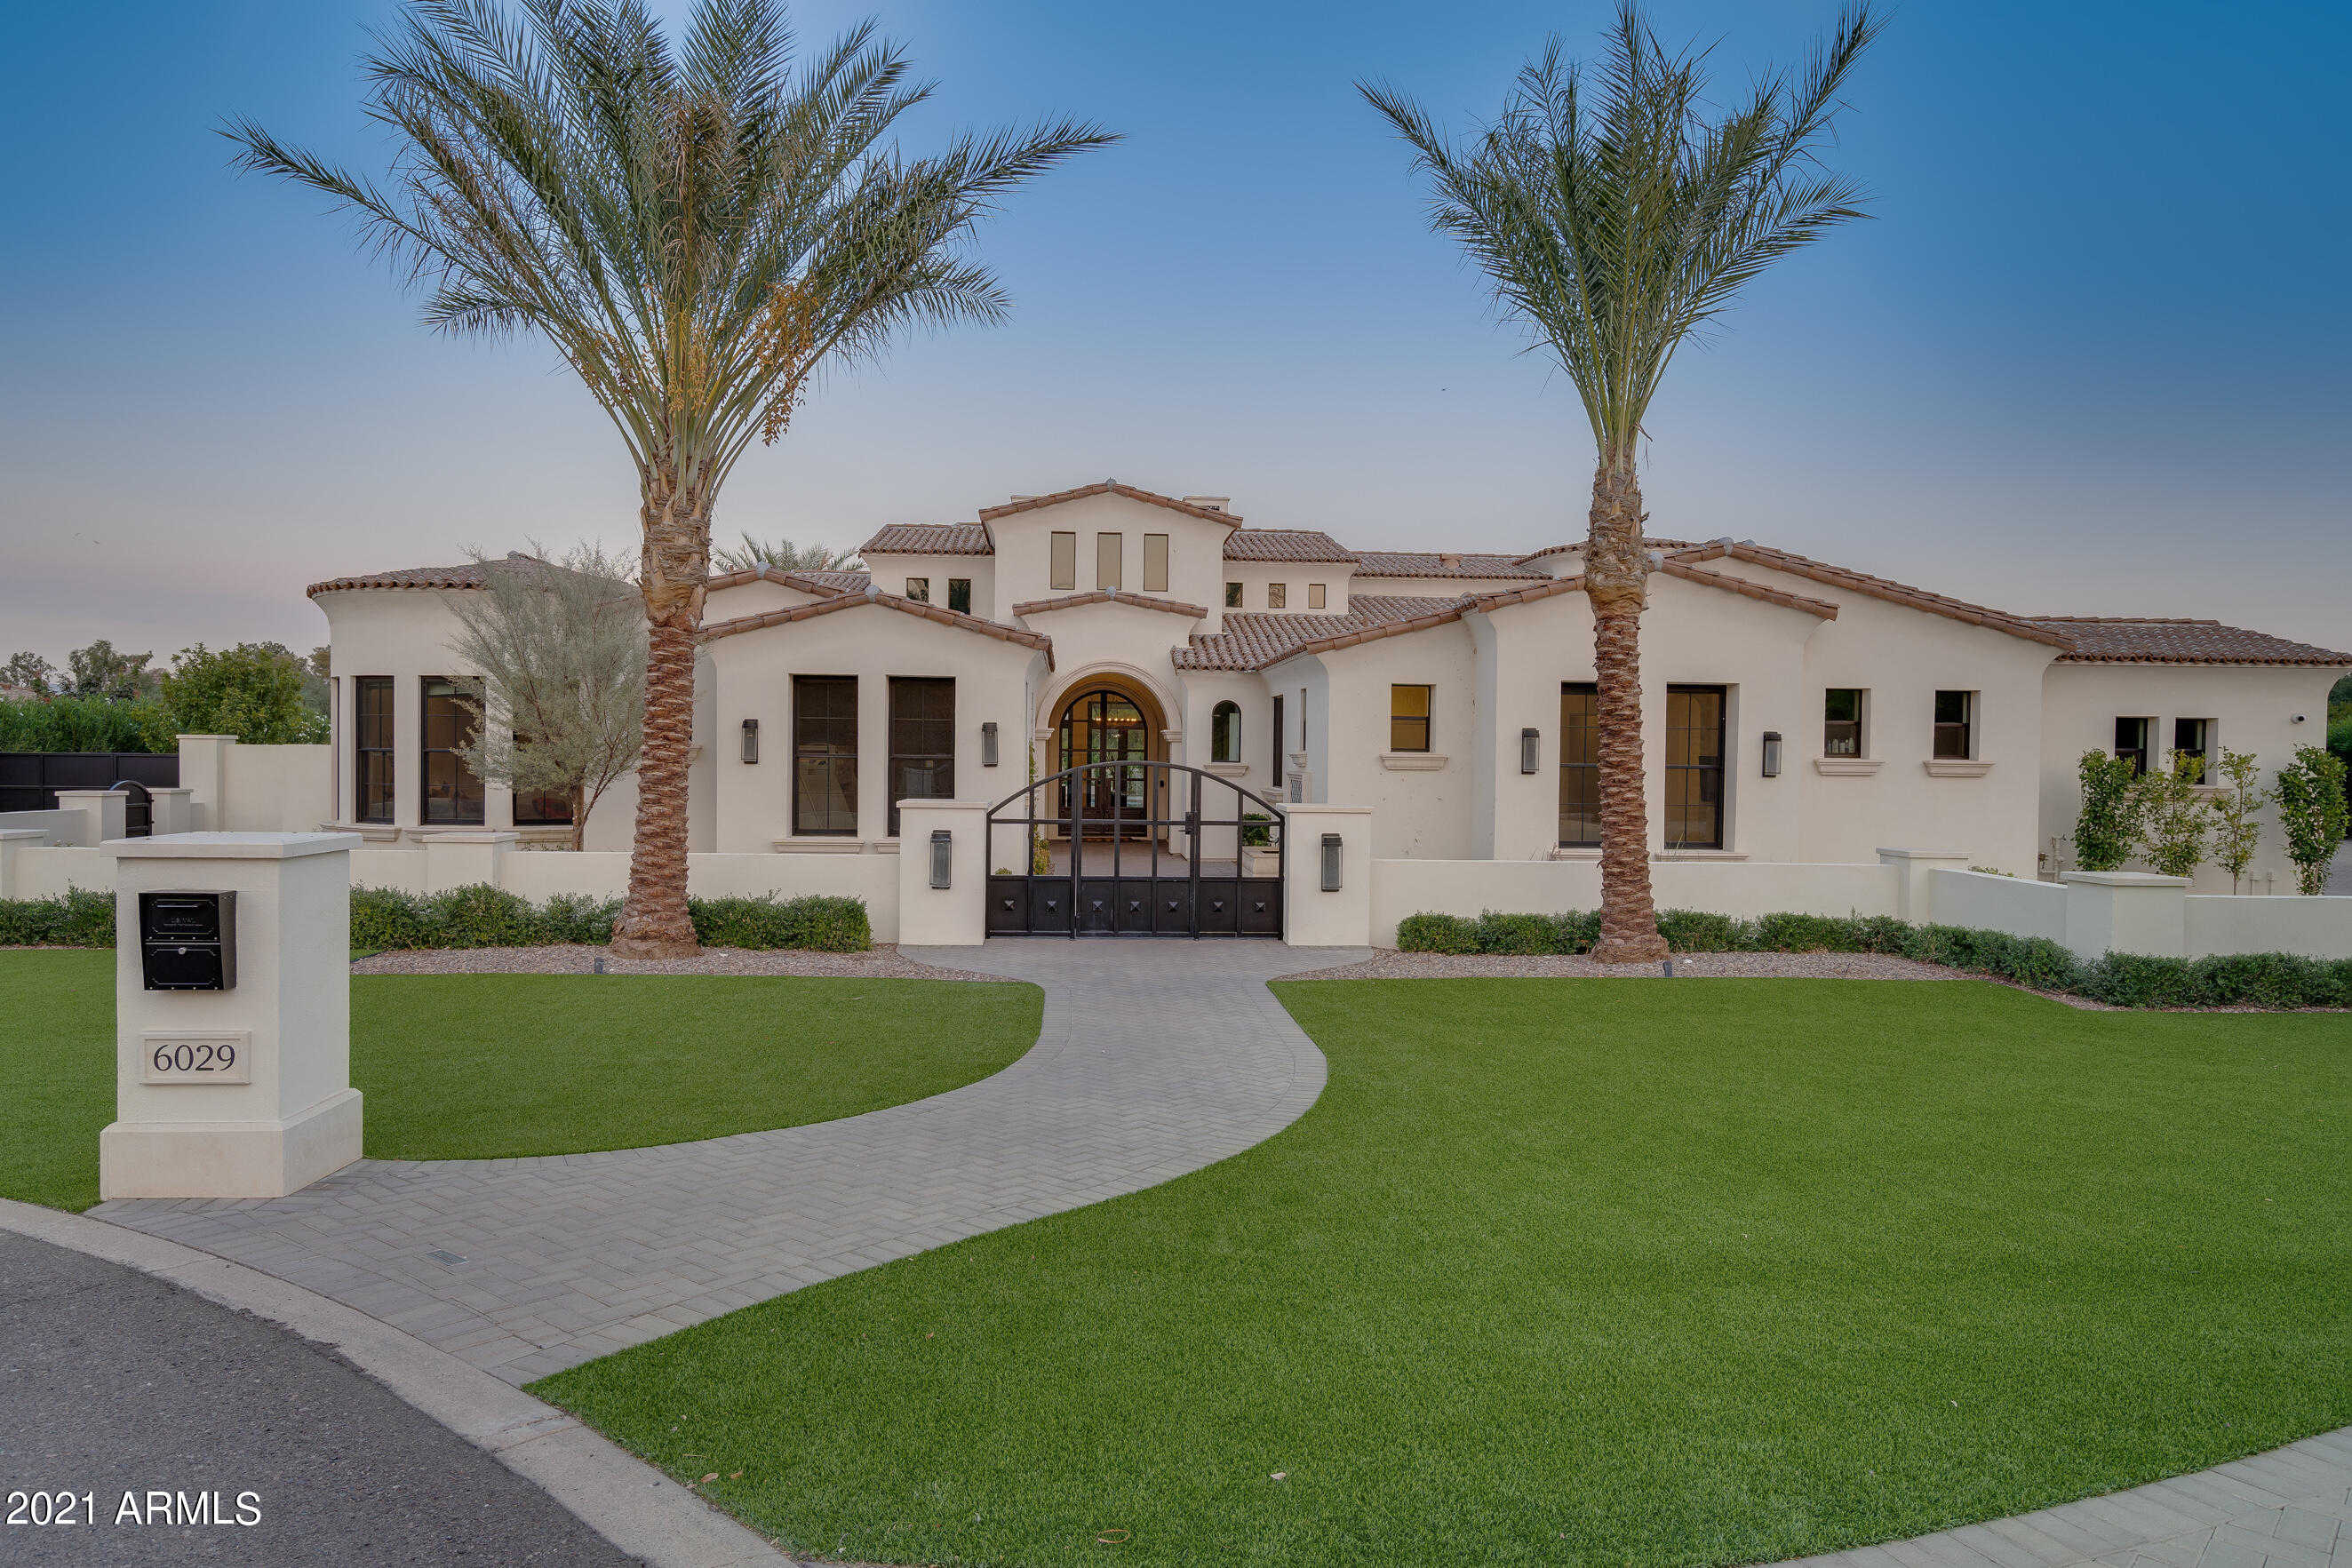 $6,595,990 - 6Br/6Ba - Home for Sale in Bel Aire Desert Estates, Paradise Valley